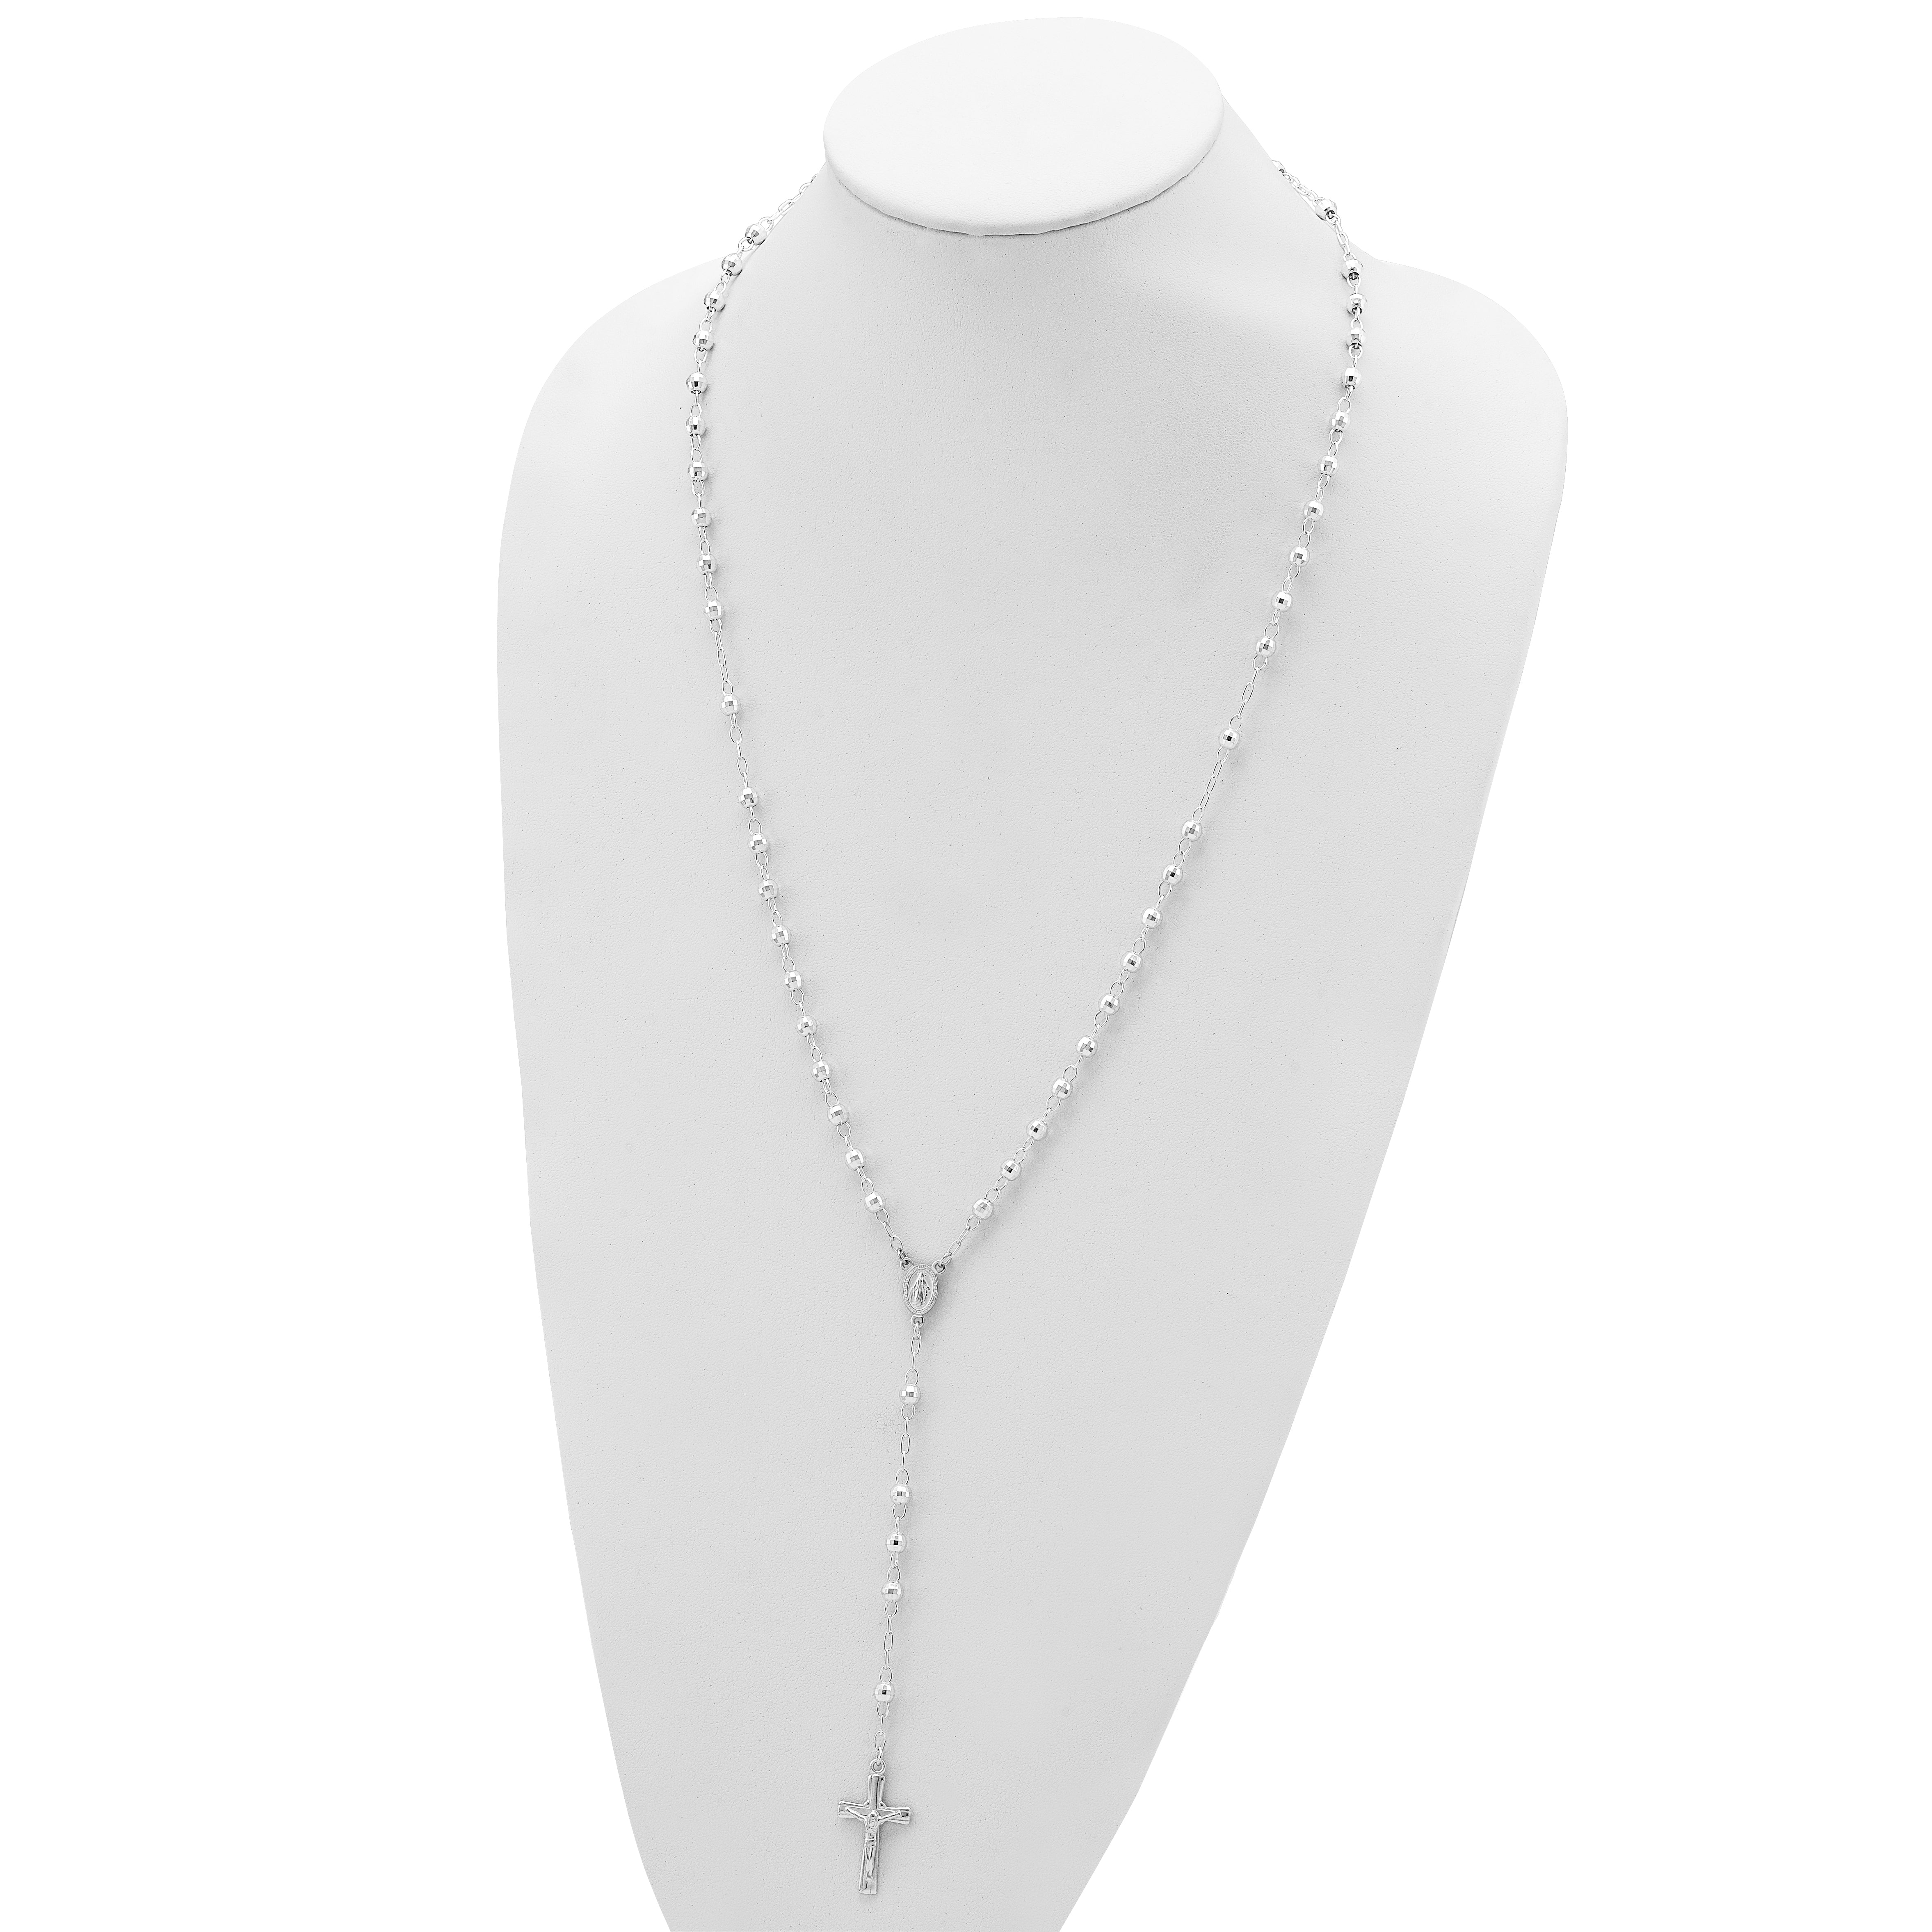 Sterling Silver Polished and Textured Bead Rosary 26 inch Necklace